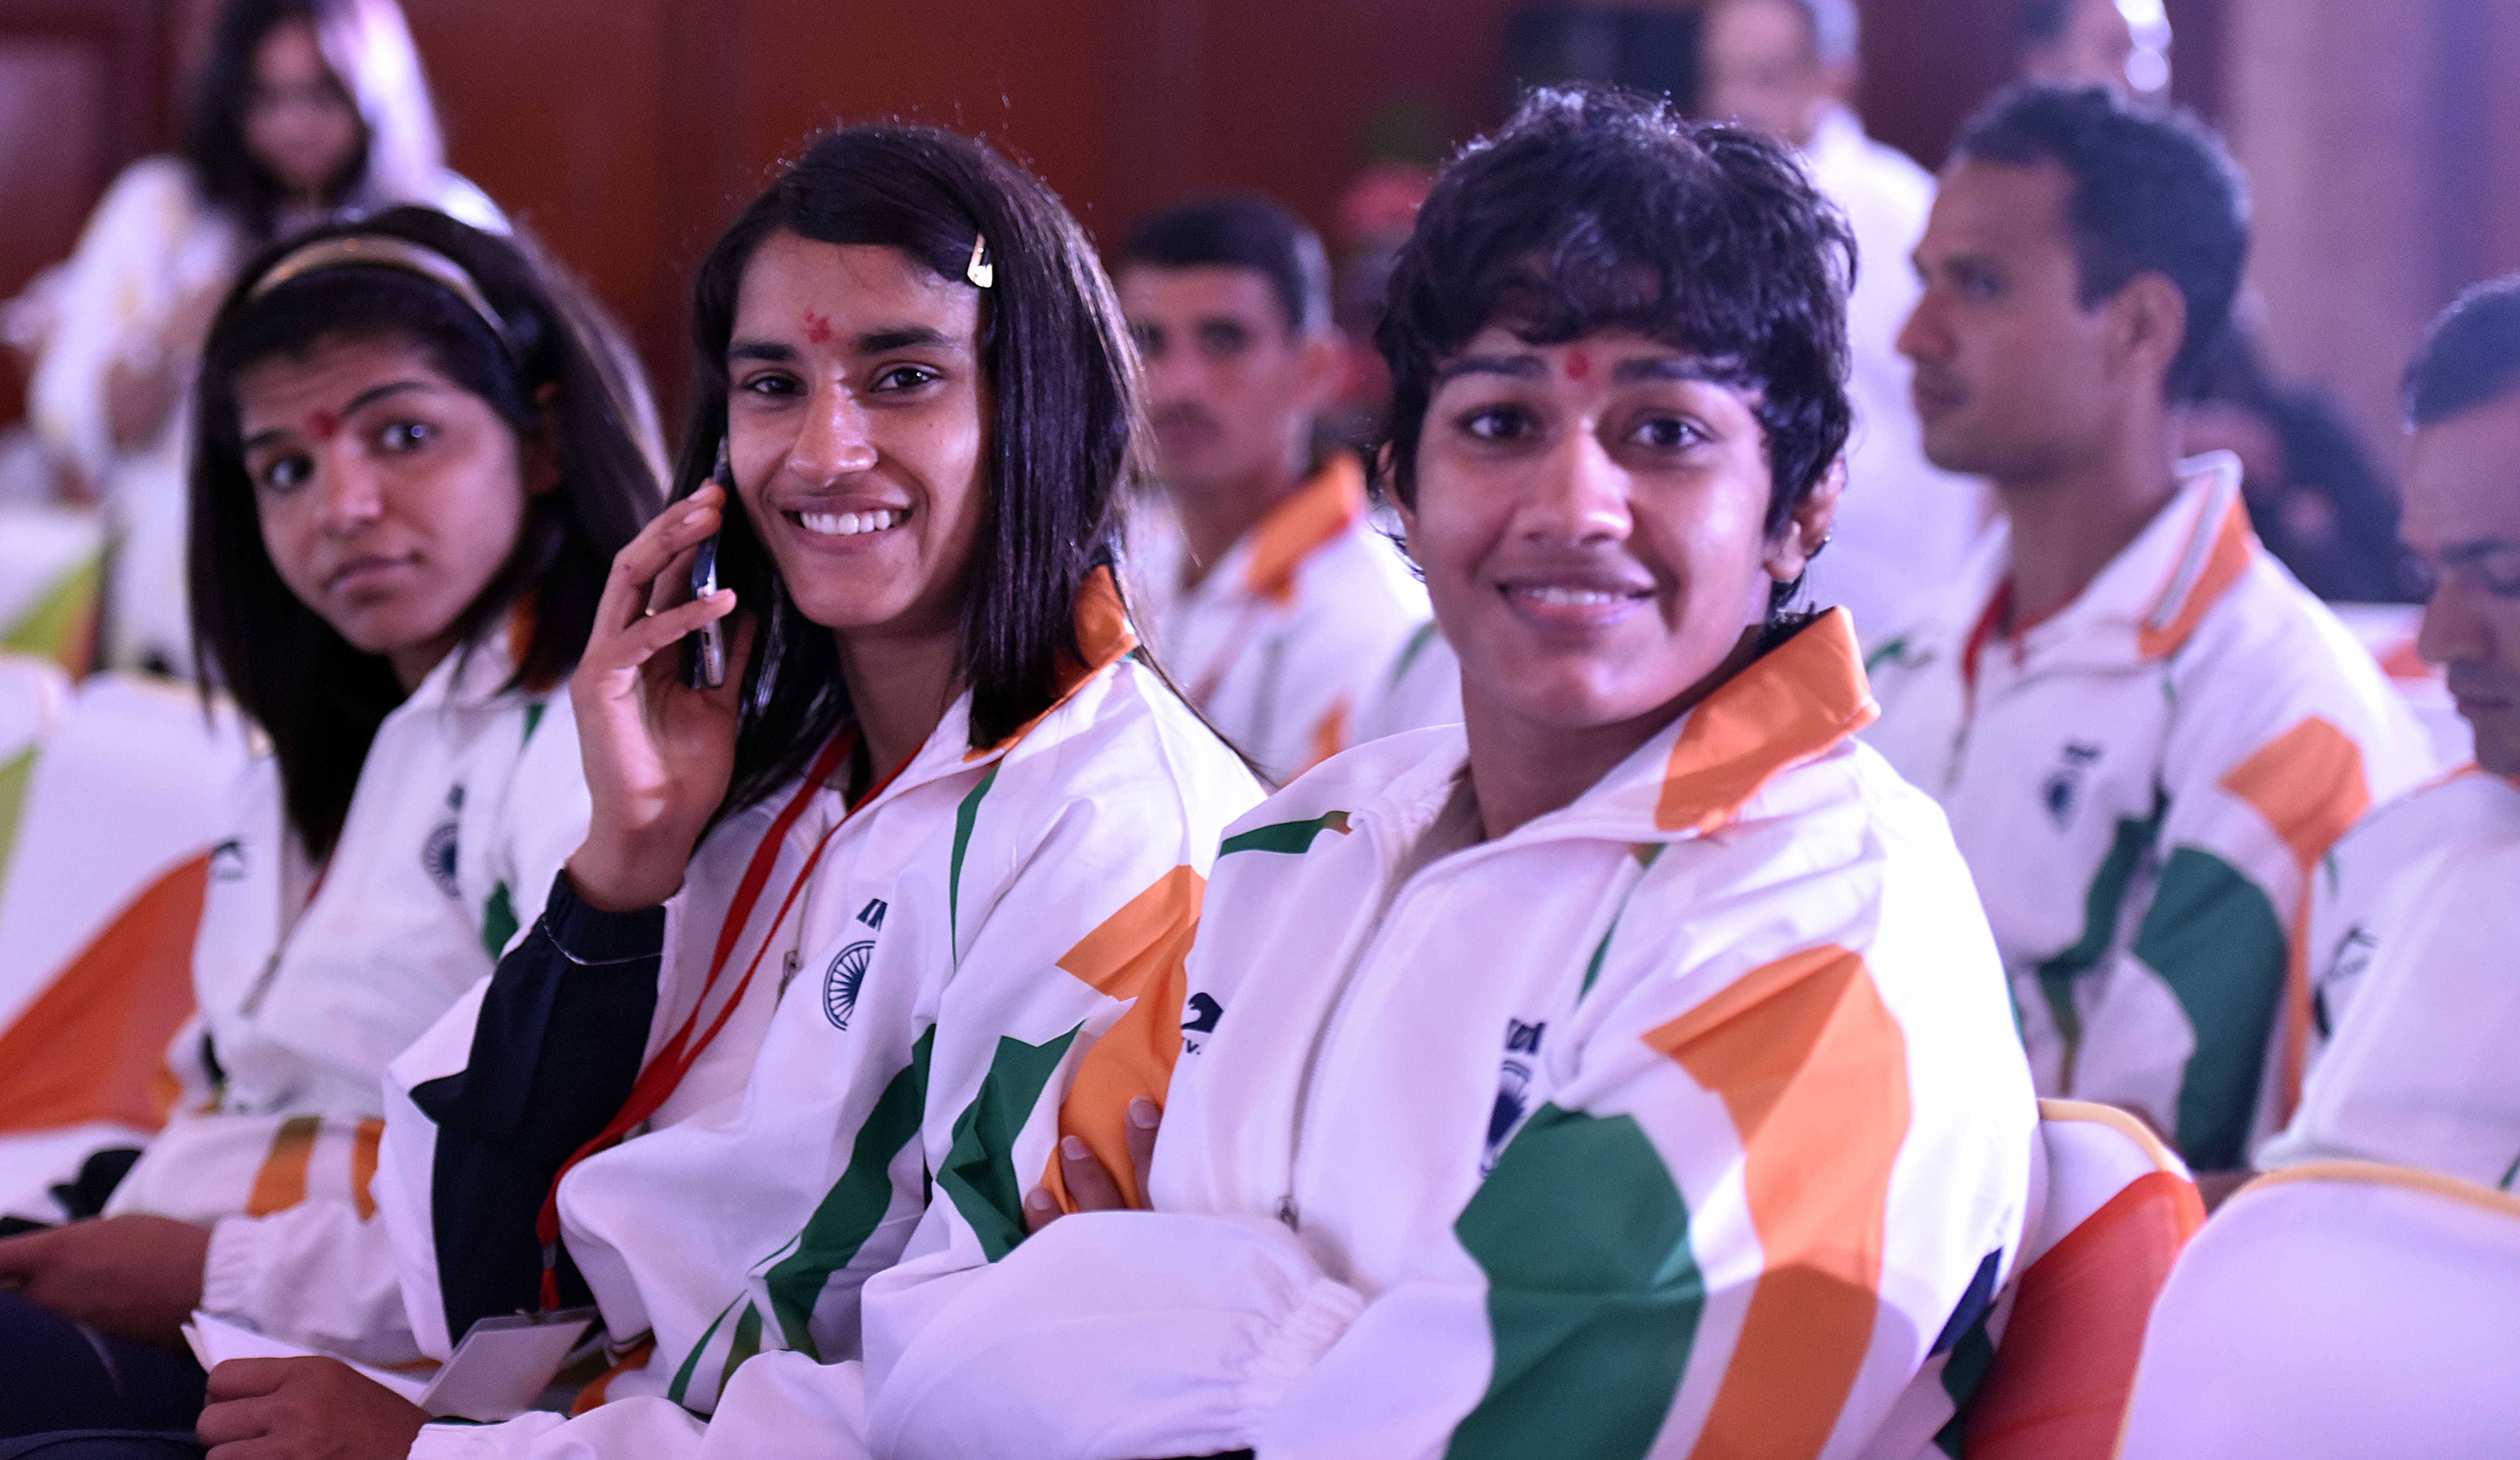 Wrestling federation disapproves of Vinesh Phogat’s decision to train privately at SAI